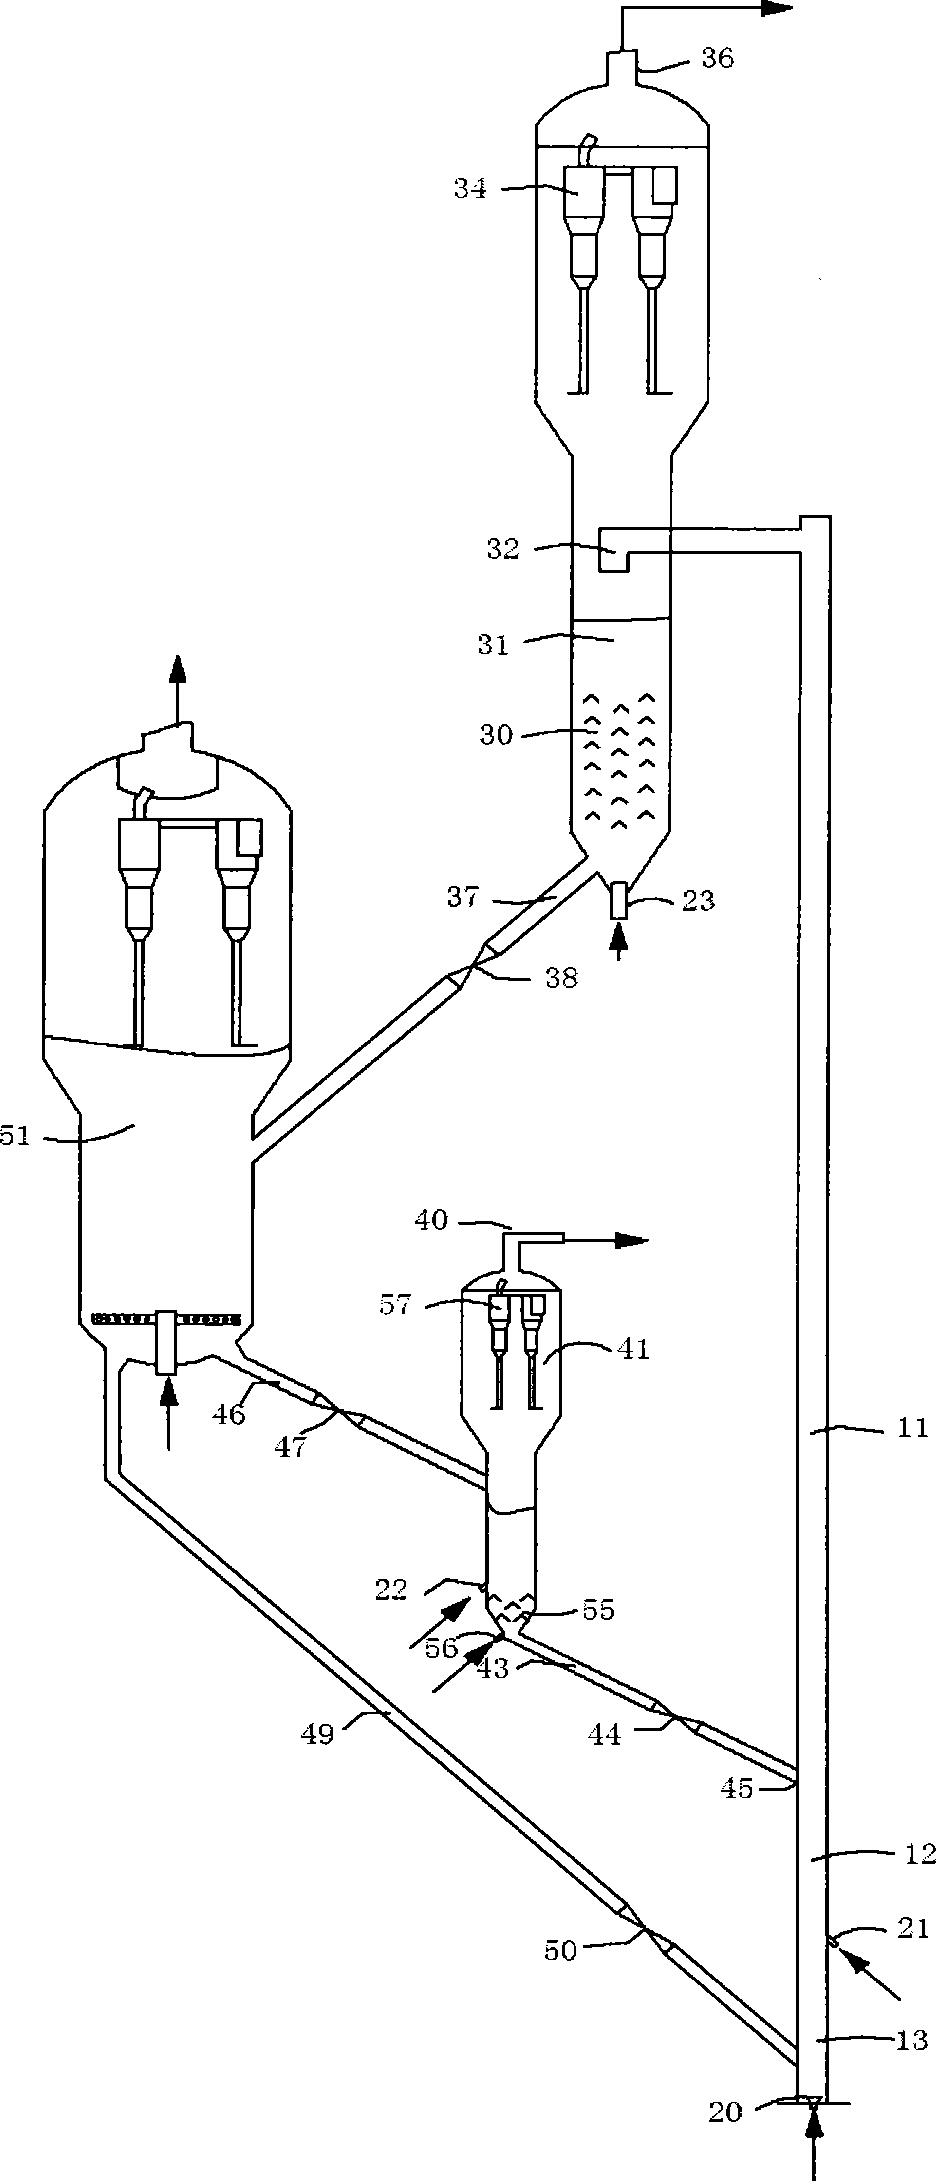 Catalytic cracking method and device capable of increasing propylene yield and improving properties of gasoline